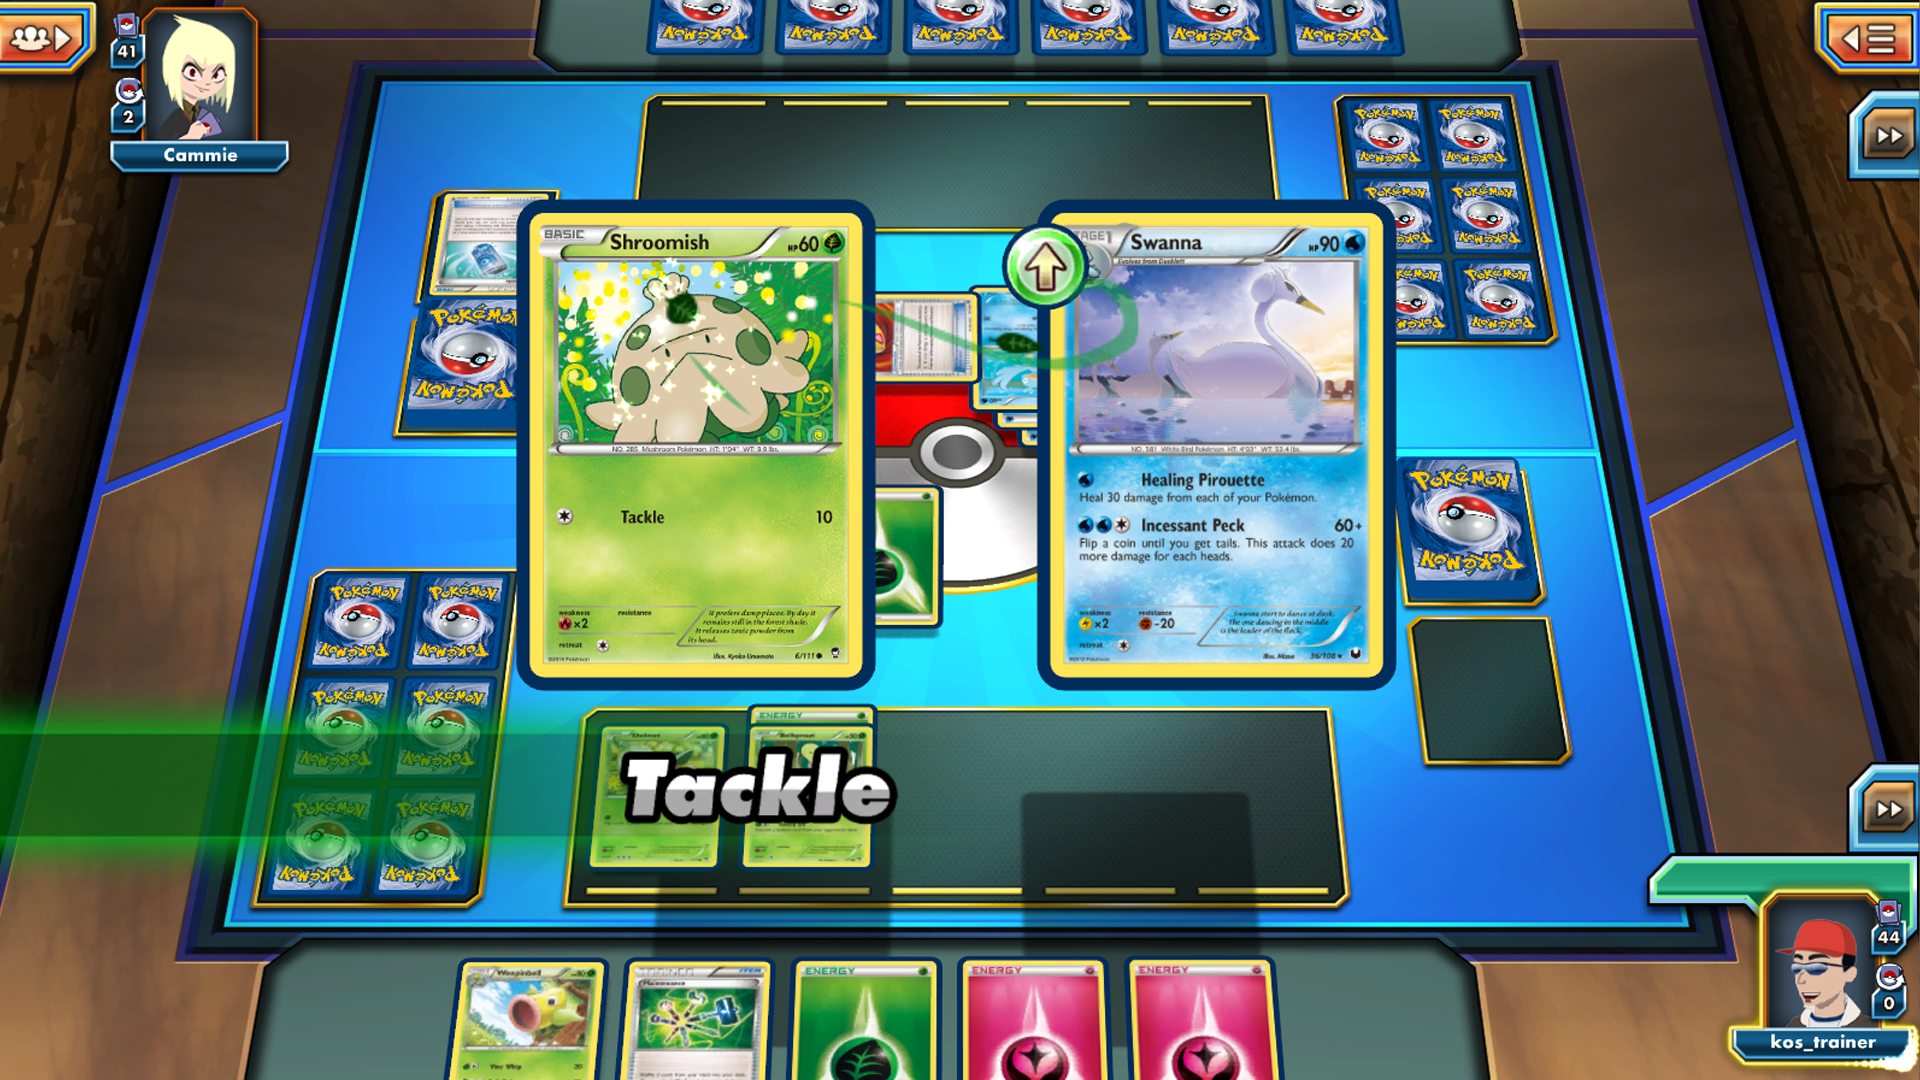 How to play Pokémon Get started on PC and | Dicebreaker